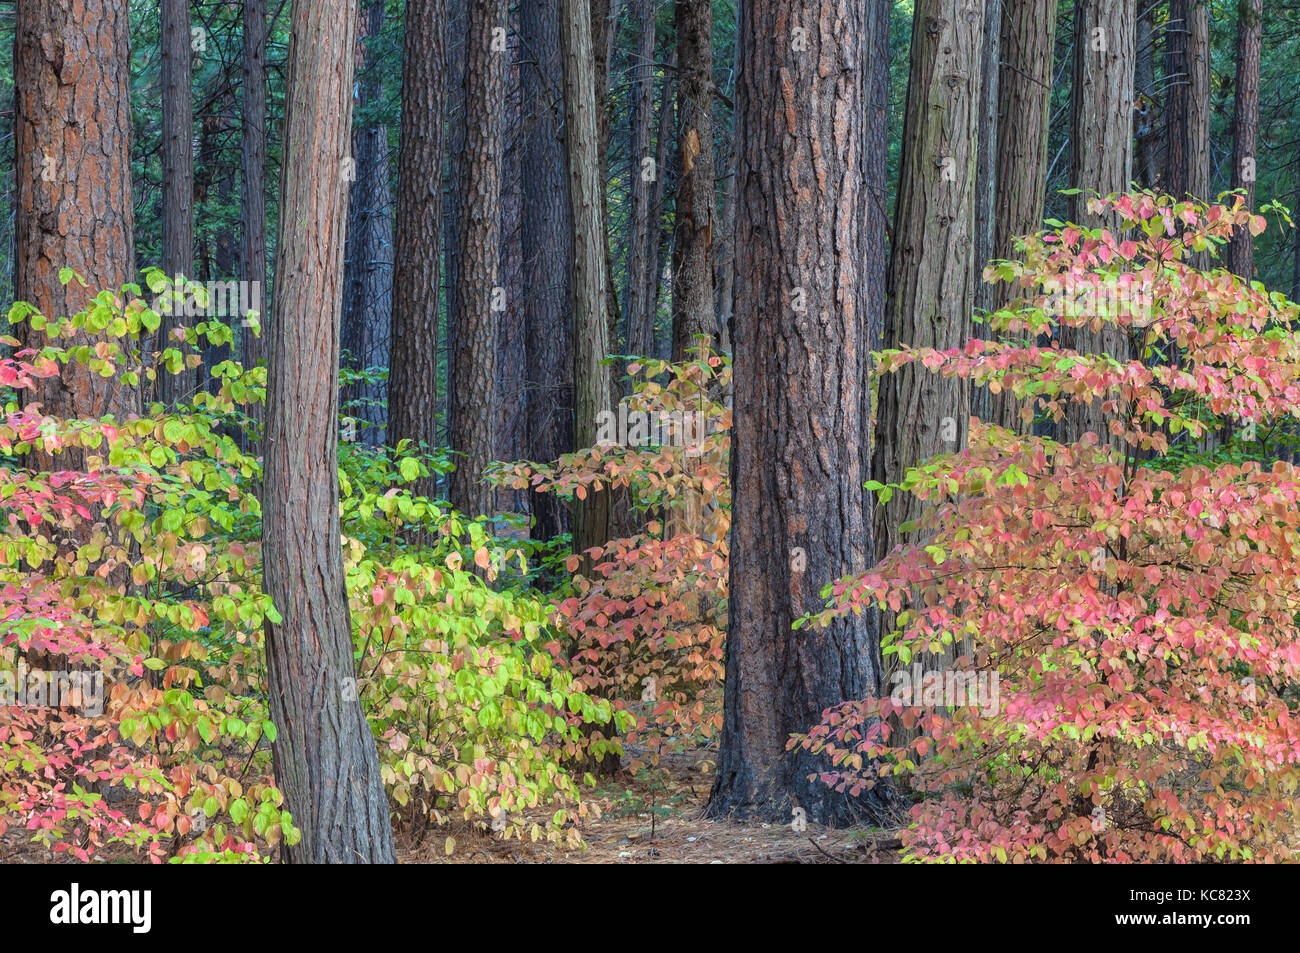 Pacific dogwoods (Cornus nuttallii) in their fall foliage, and the ponderosa pine trees in Yosemite National Park, California. Stock Photo